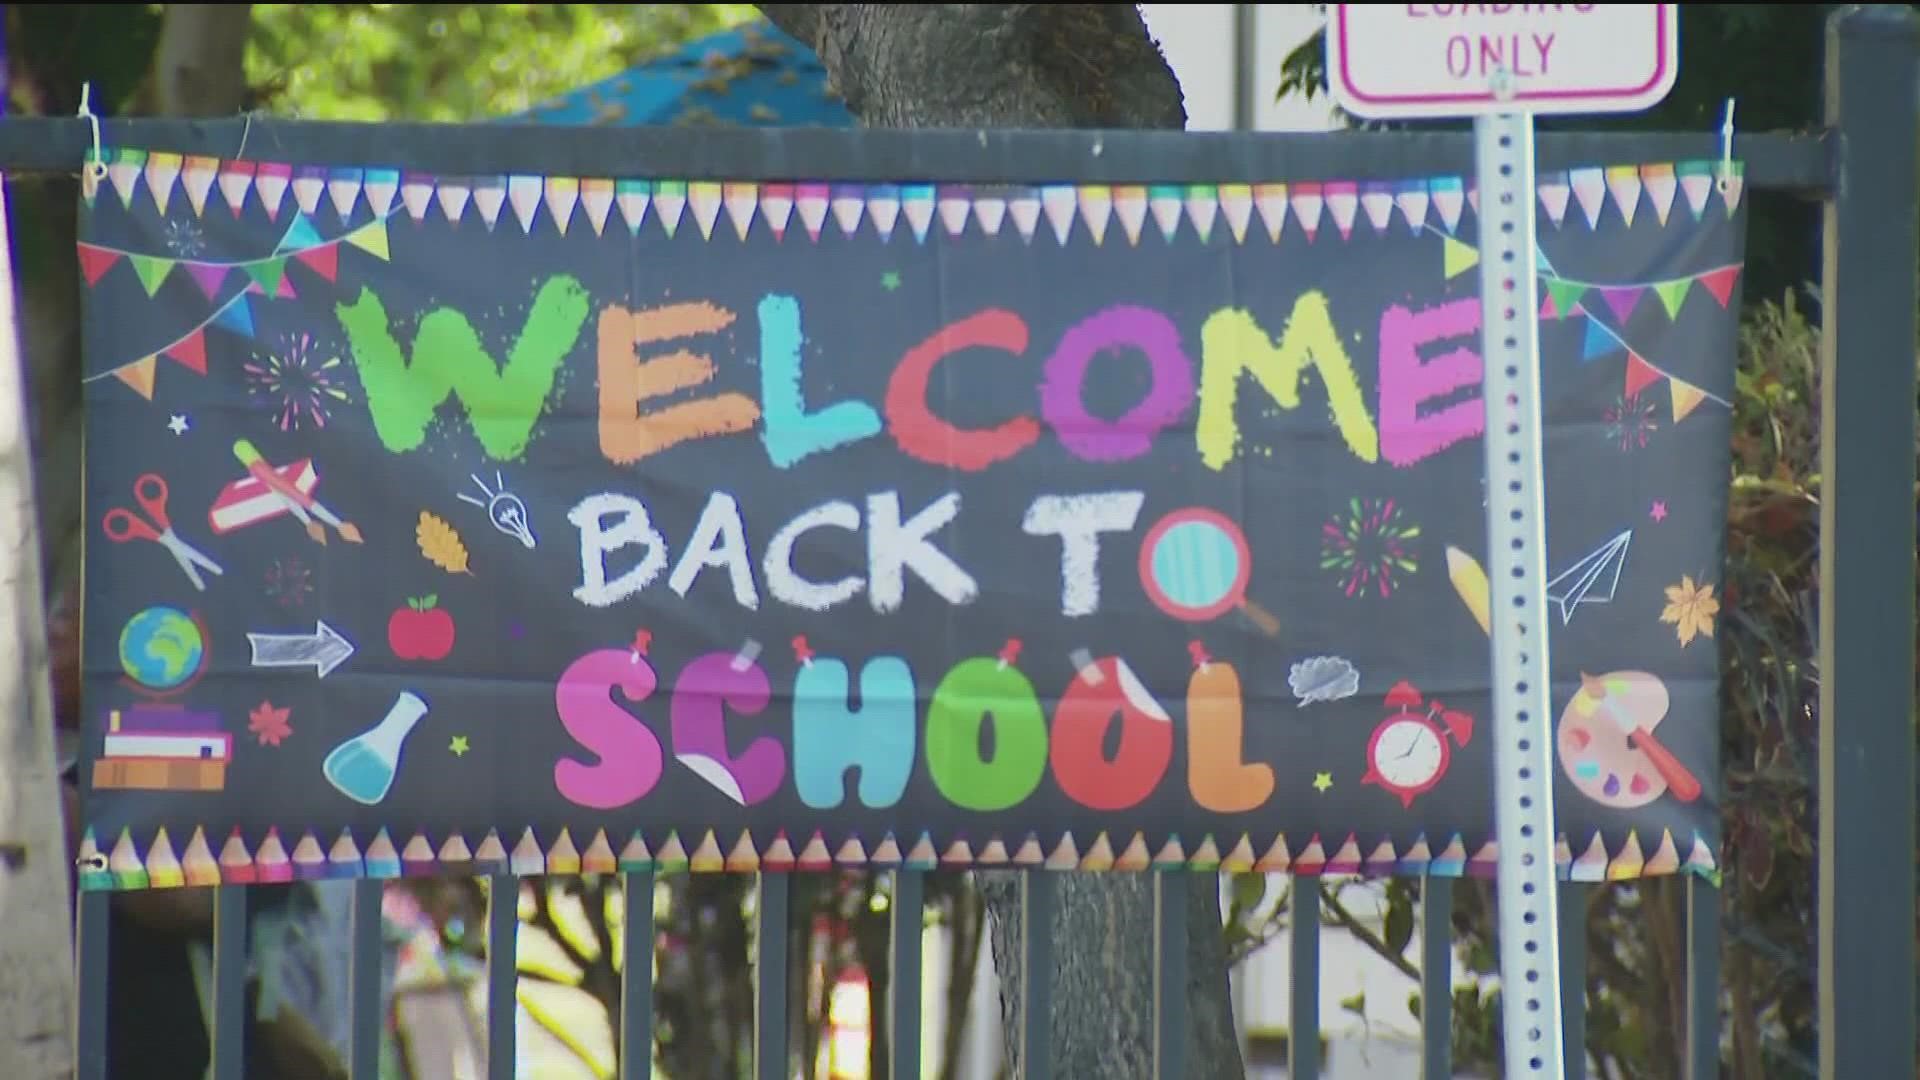 Students across San Diego County return to school - as does the stress that goes with it